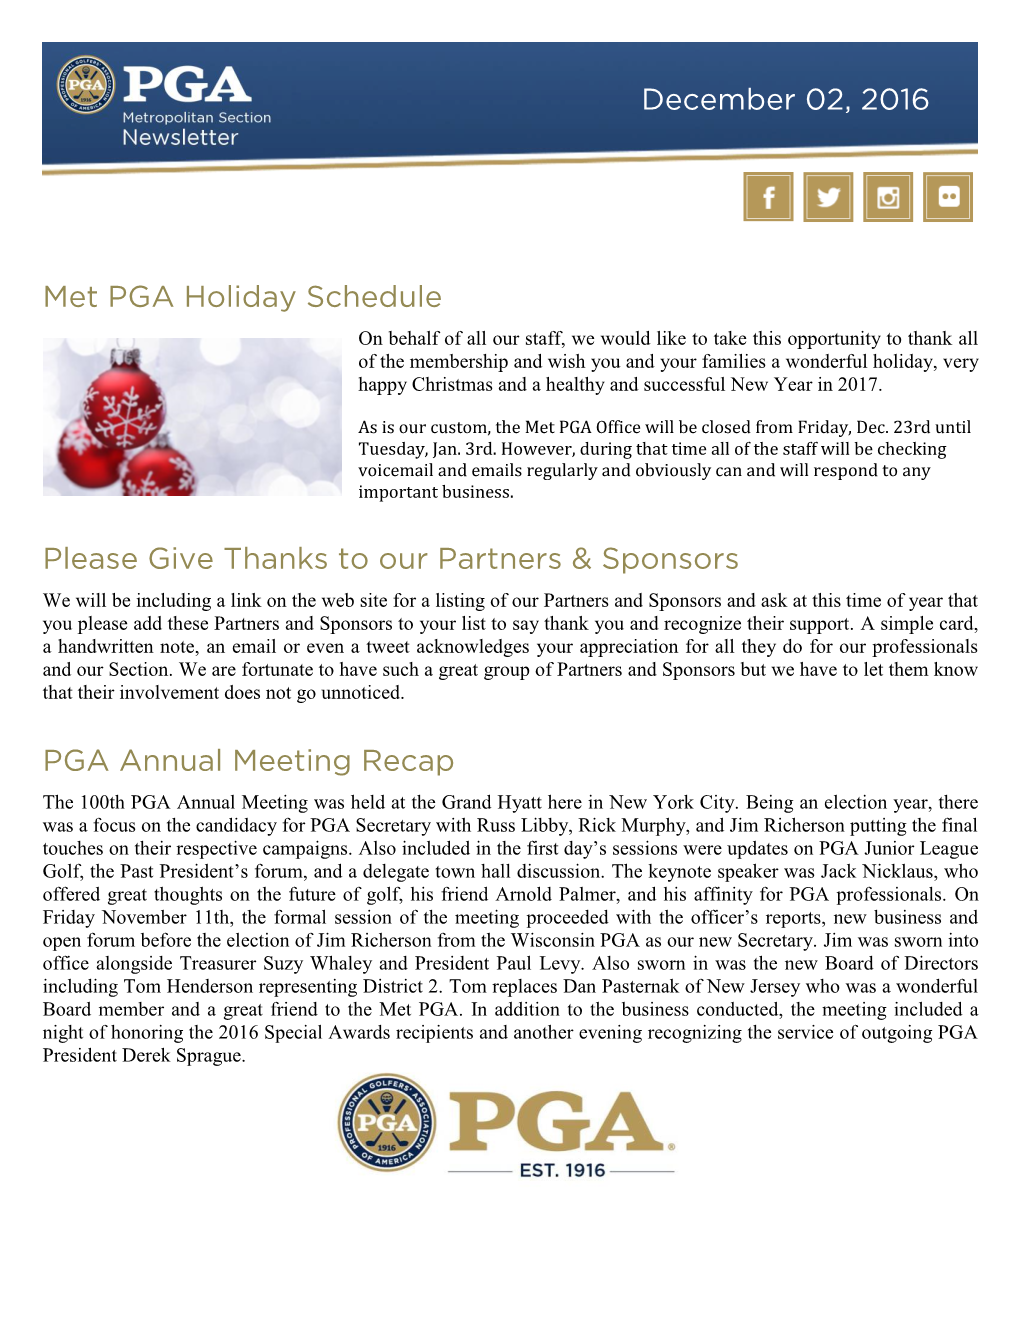 Met PGA Holiday Schedule Please Give Thanks to Our Partners